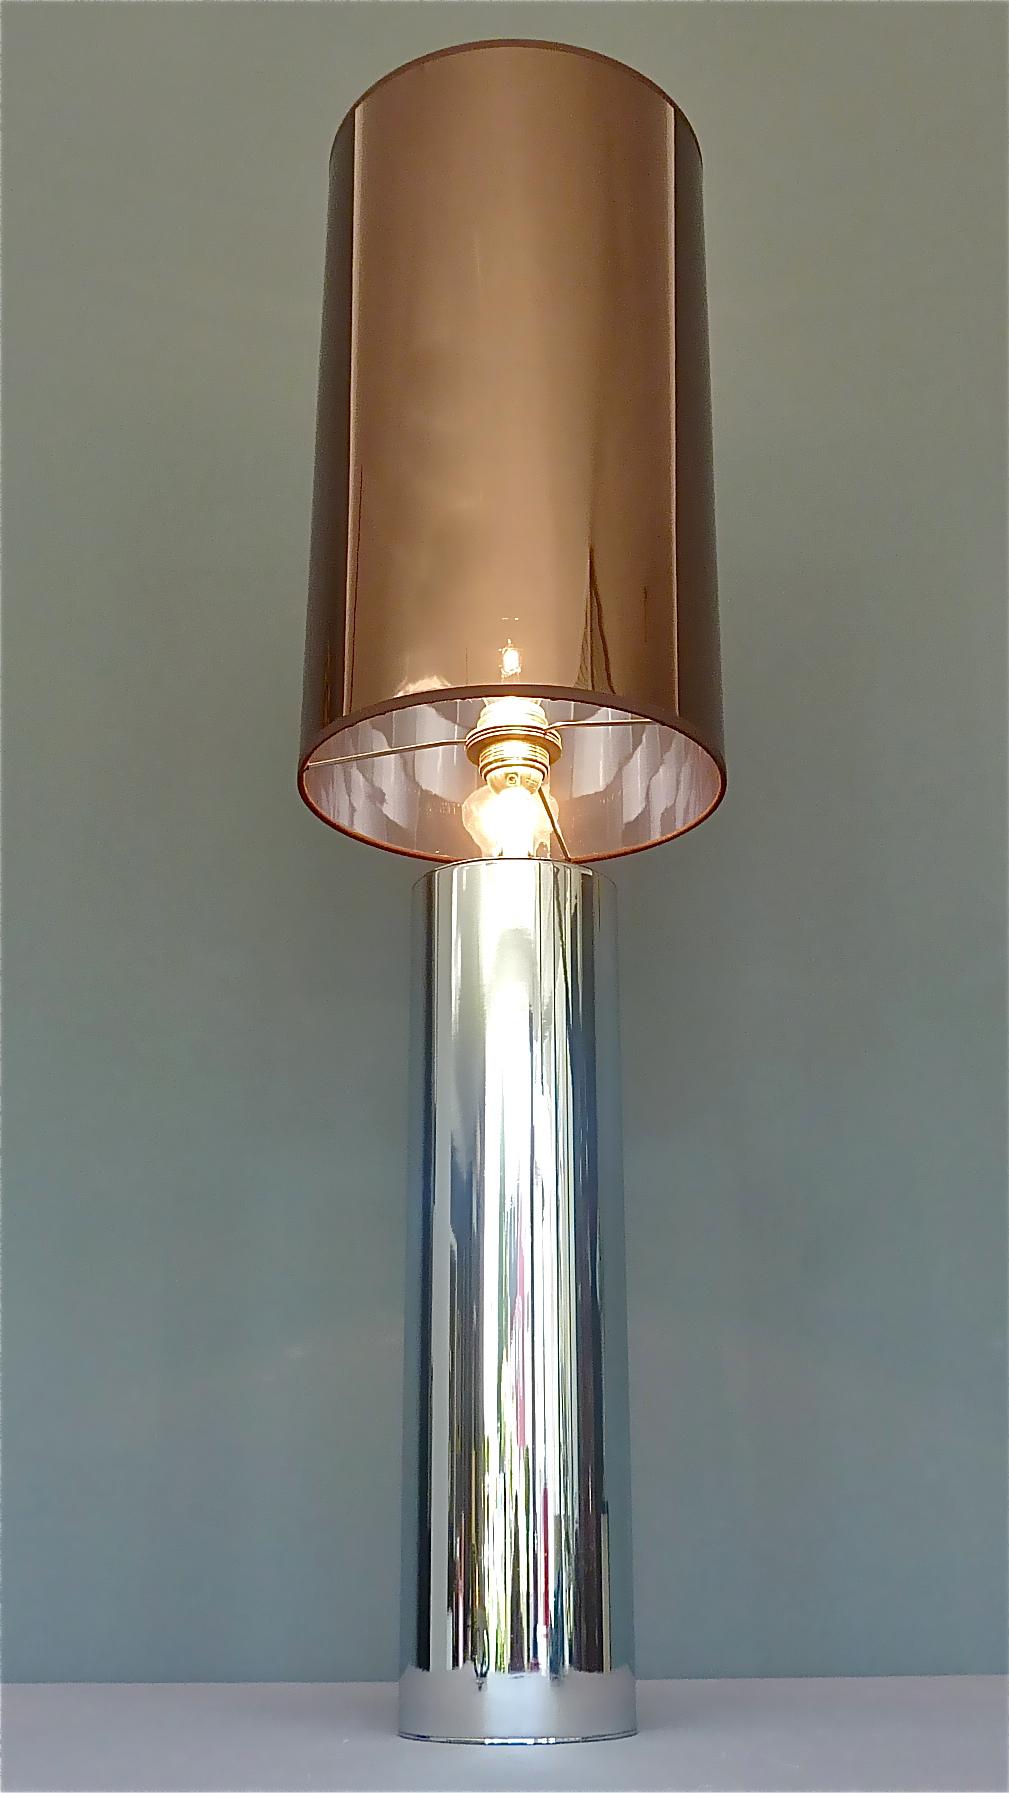 Monumental Chrome Steel Table Lamp Willy Rizzo Cardin Style Bronze Mirror 1970s For Sale 4